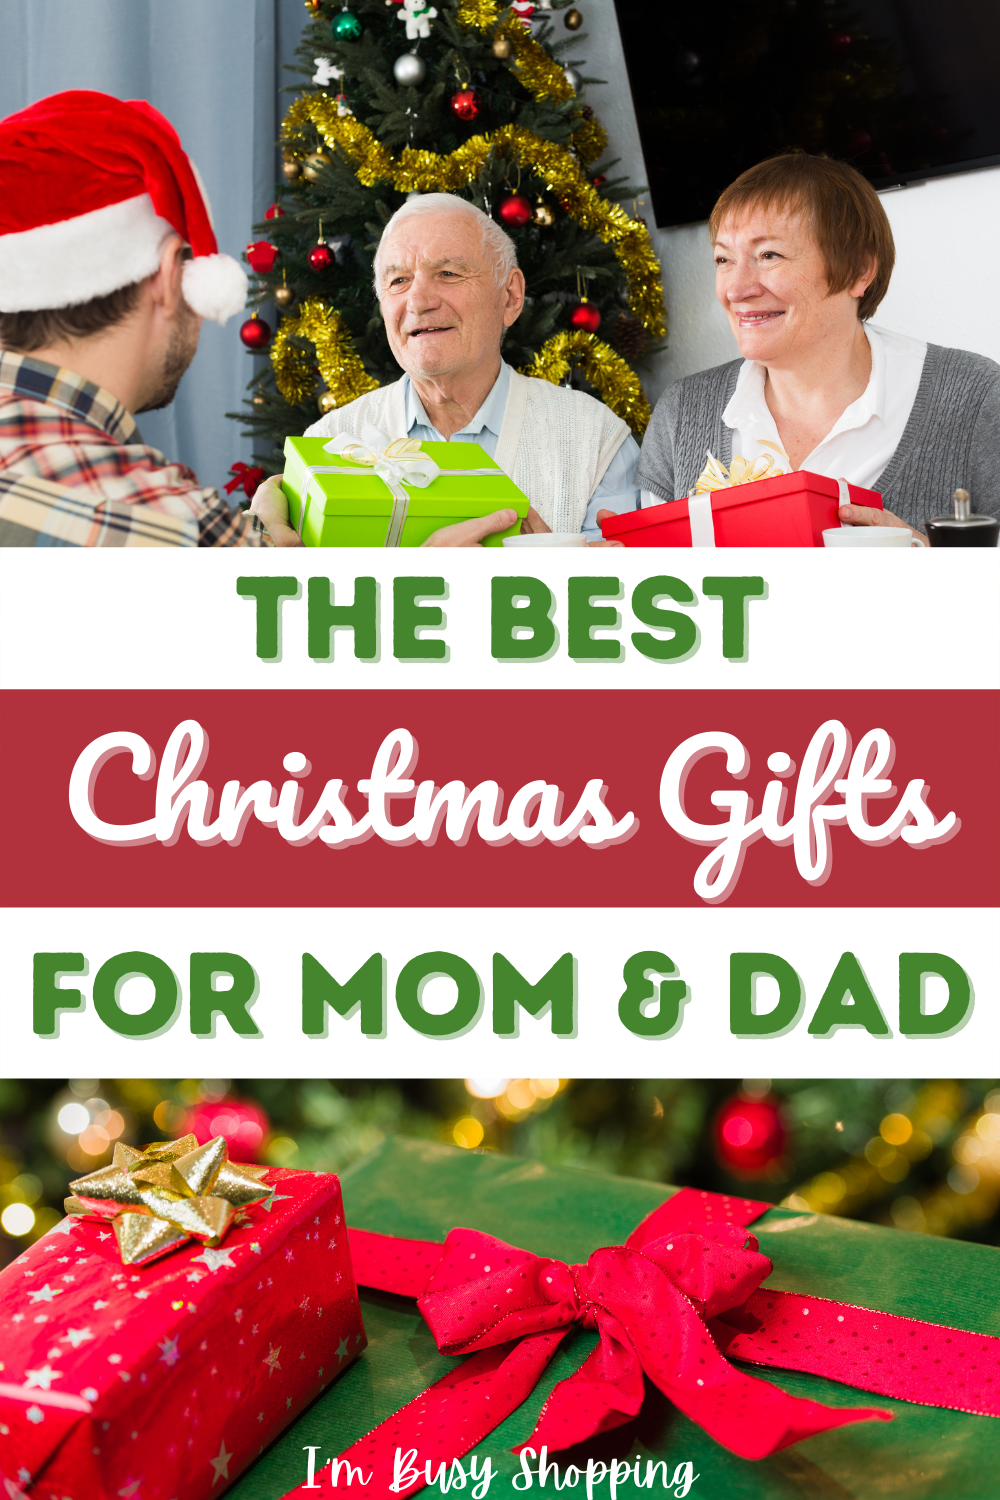 Pin showing the best Christmas Gifts for Mom and Dad